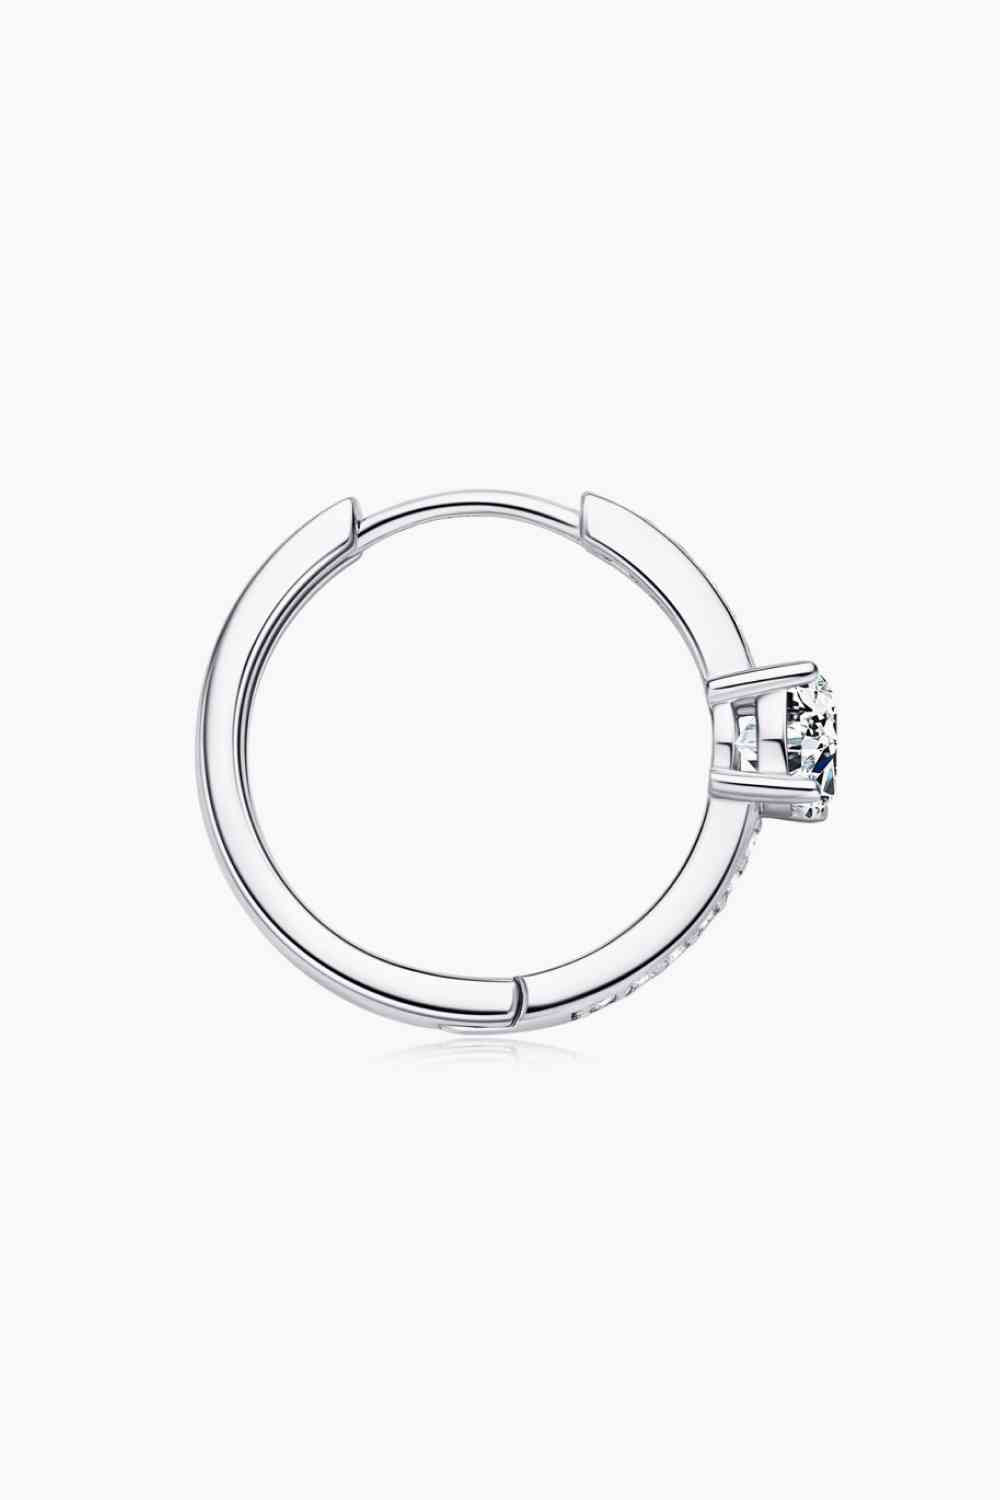 Carry Your Love 1 Carat Moissanite Platinum-Plated Earrings - lolaluxeshop